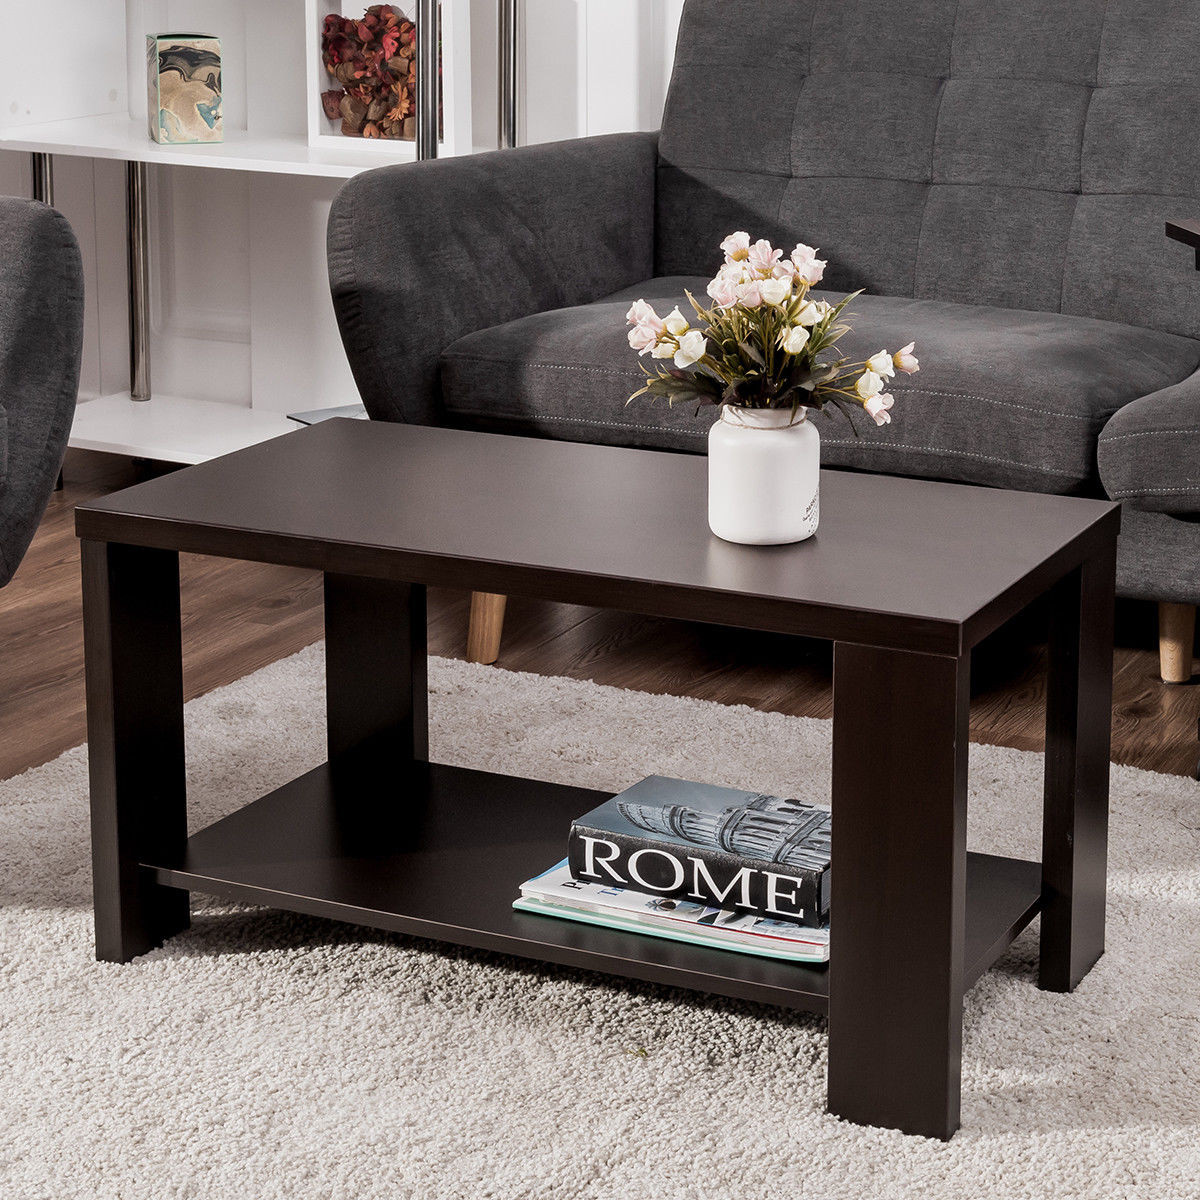 Living Room Tables With Storage
 Giantex Coffee Table Rectangular Cocktail Table Wood